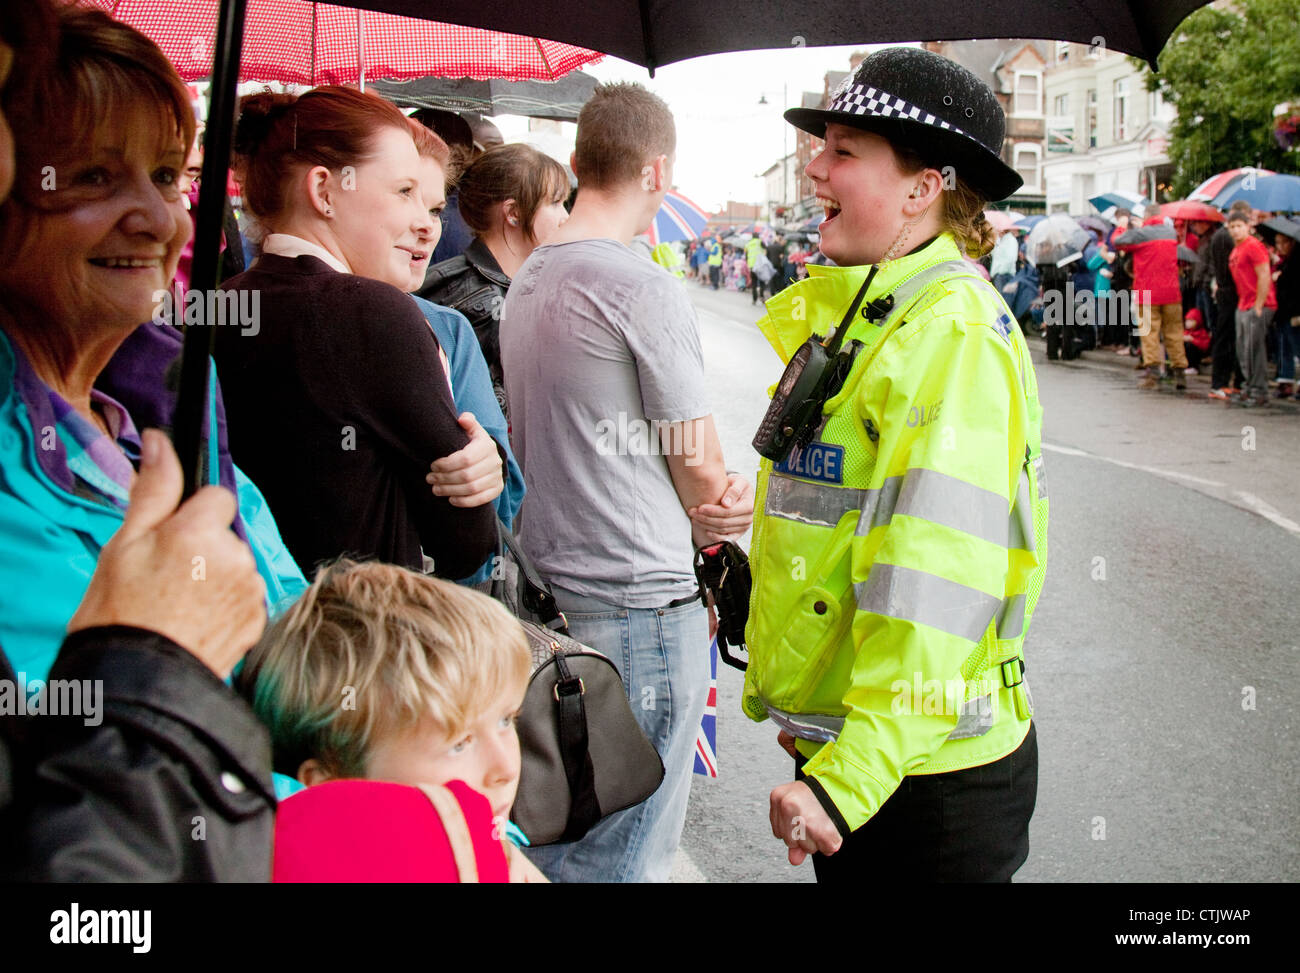 Cheerful policewoman talking with the public, UK Stock Photo